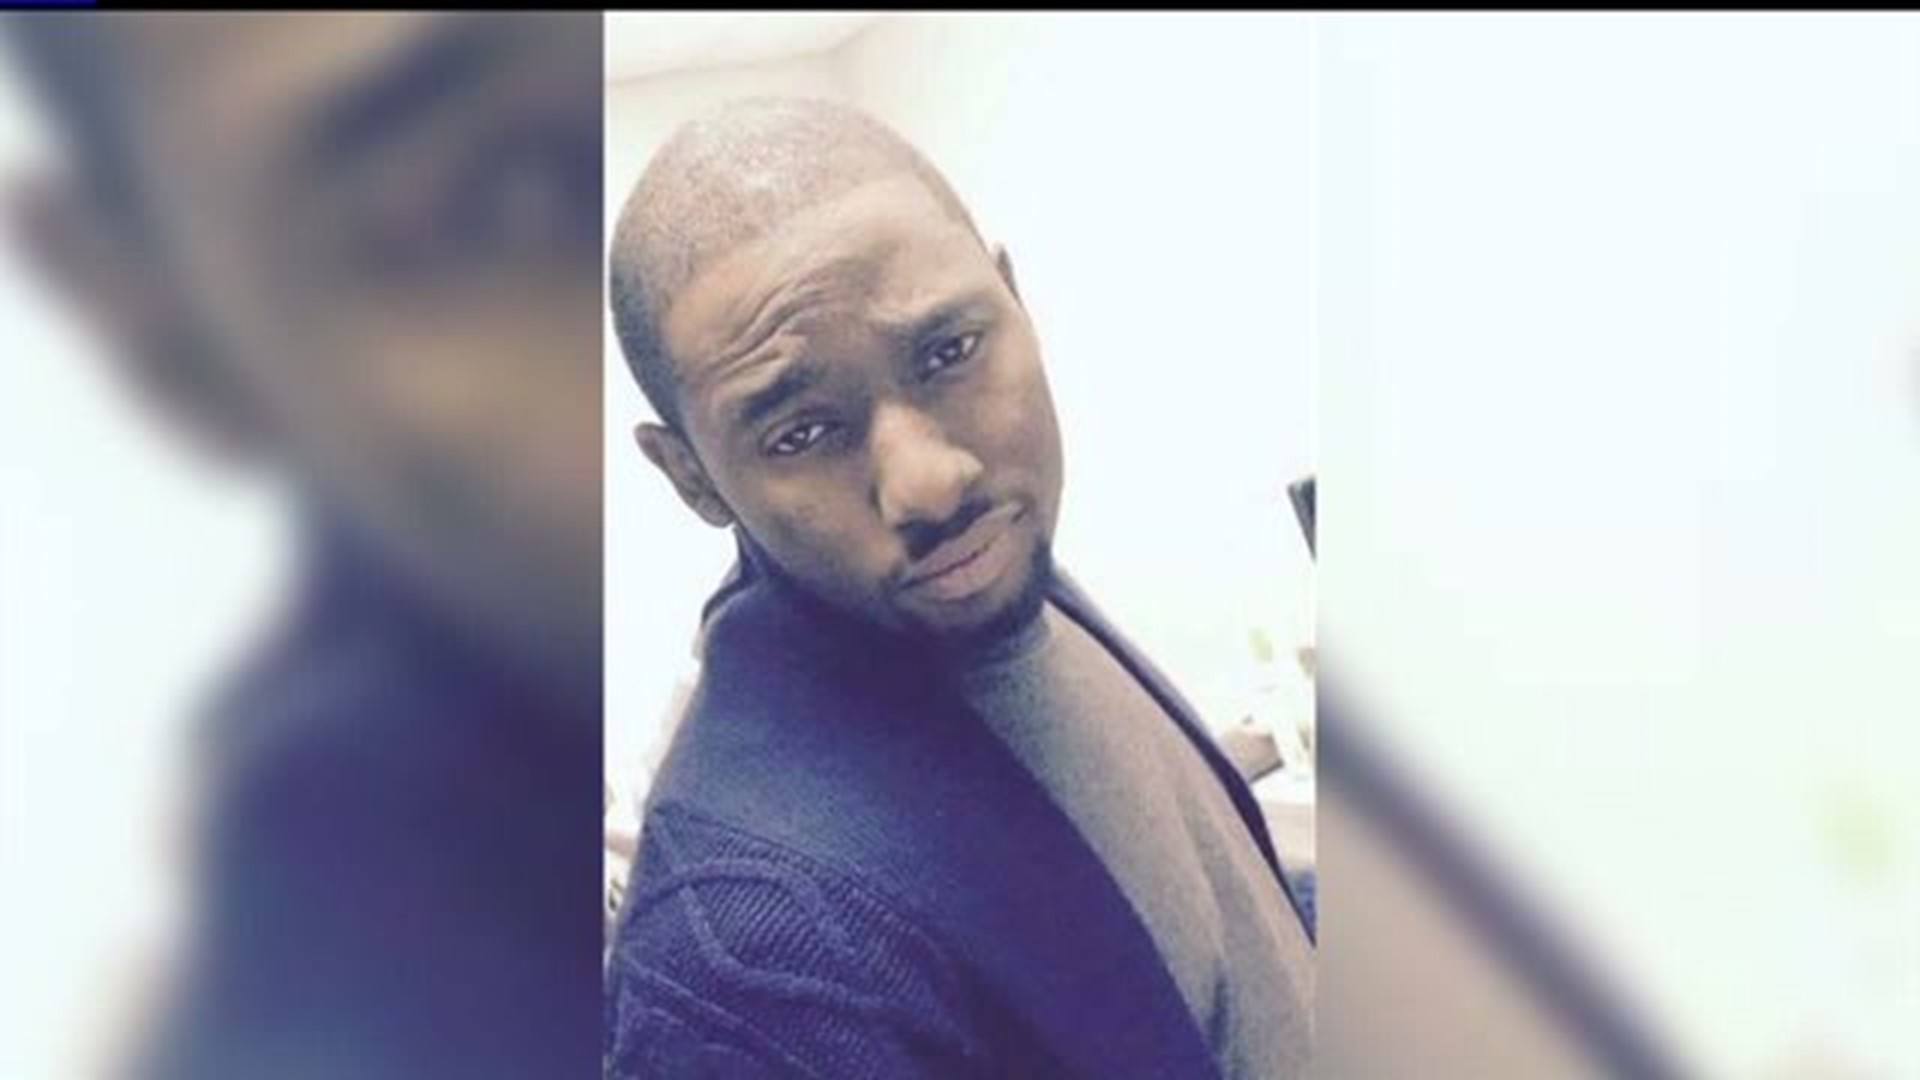 Family and friends mourn man`s death as police search for suspects